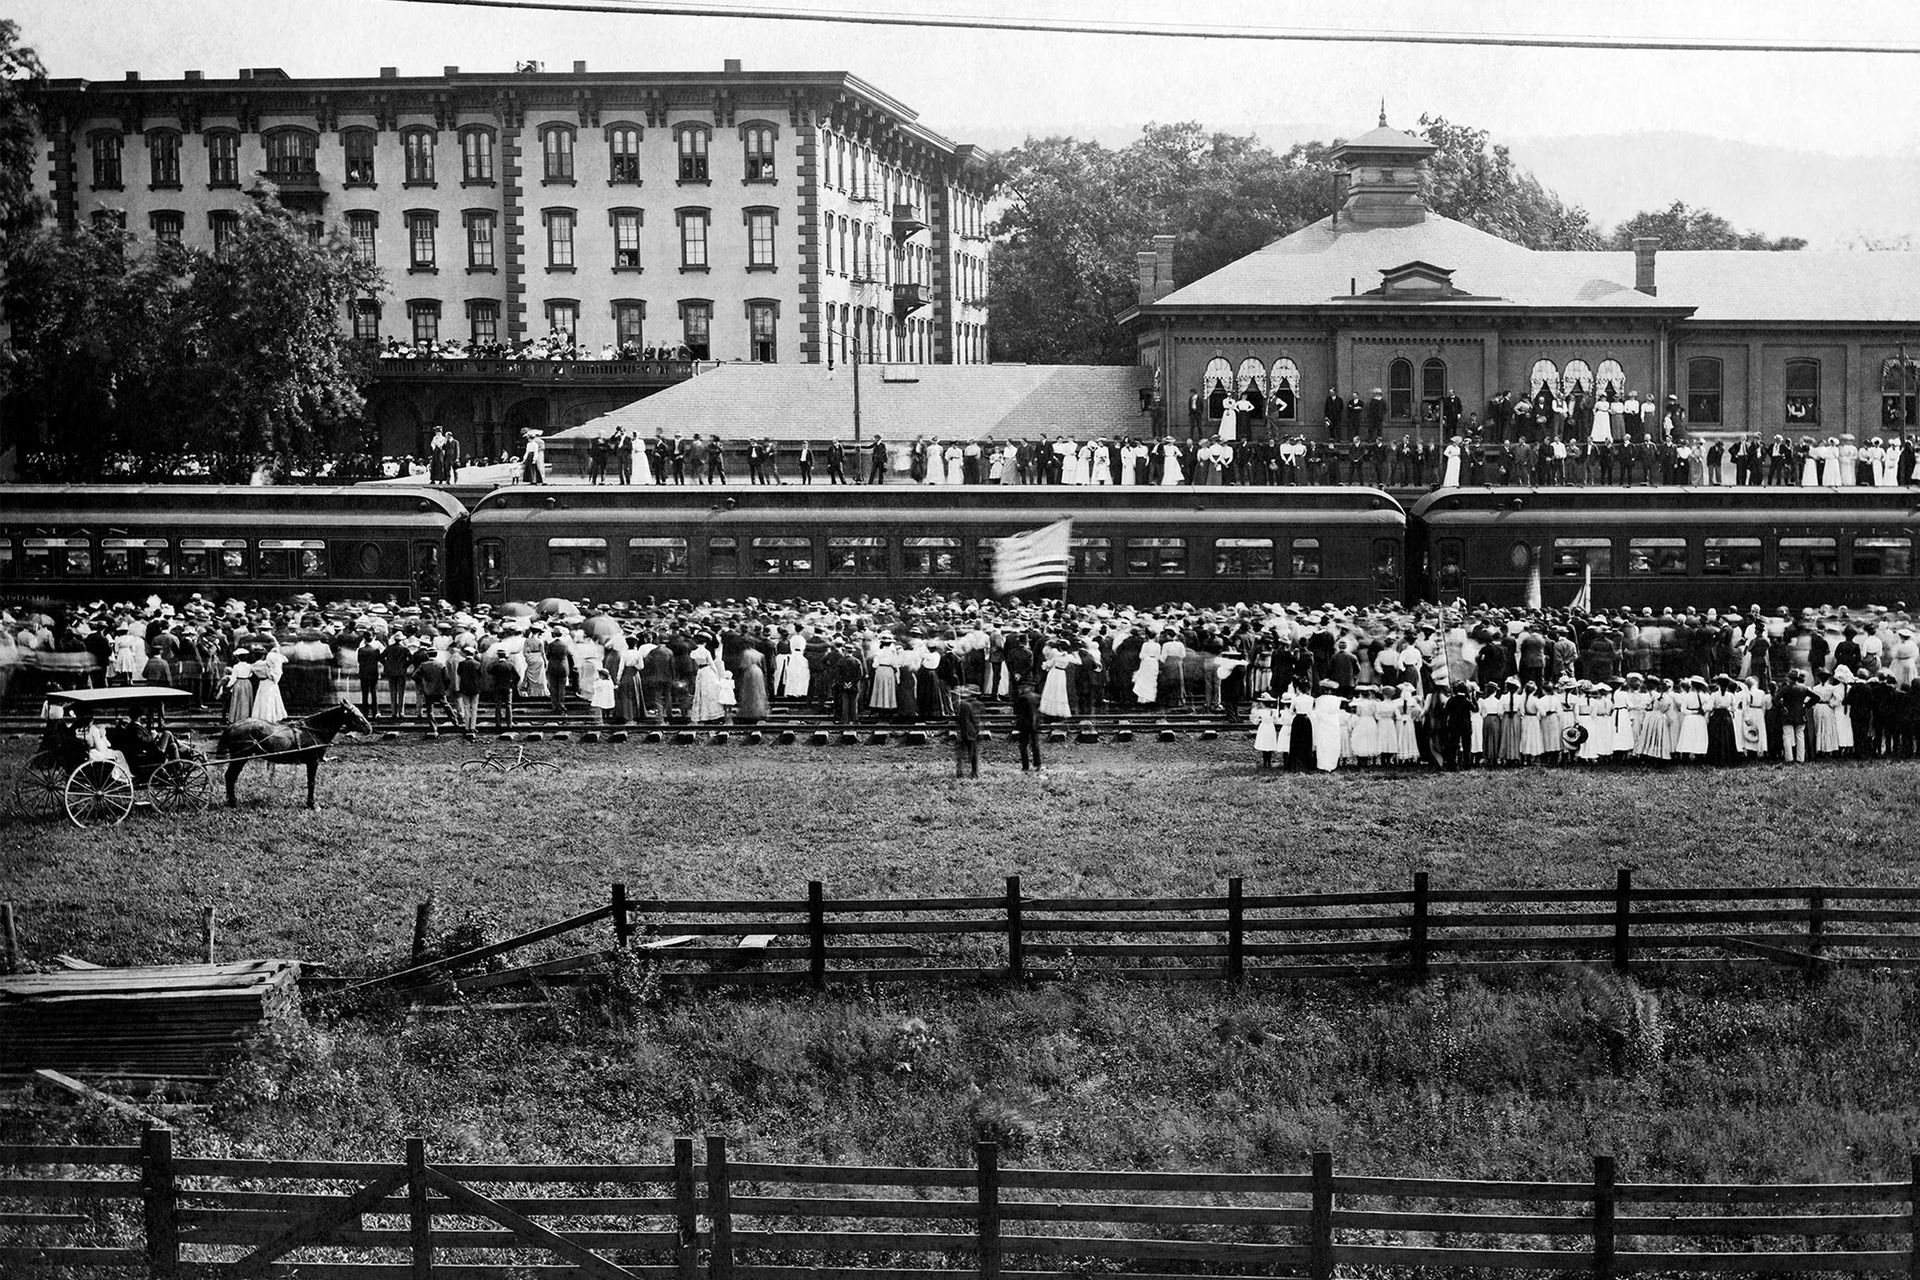 President McKinley's Funeral Train on September 16, 1901 at the train station behind the Park Hotel